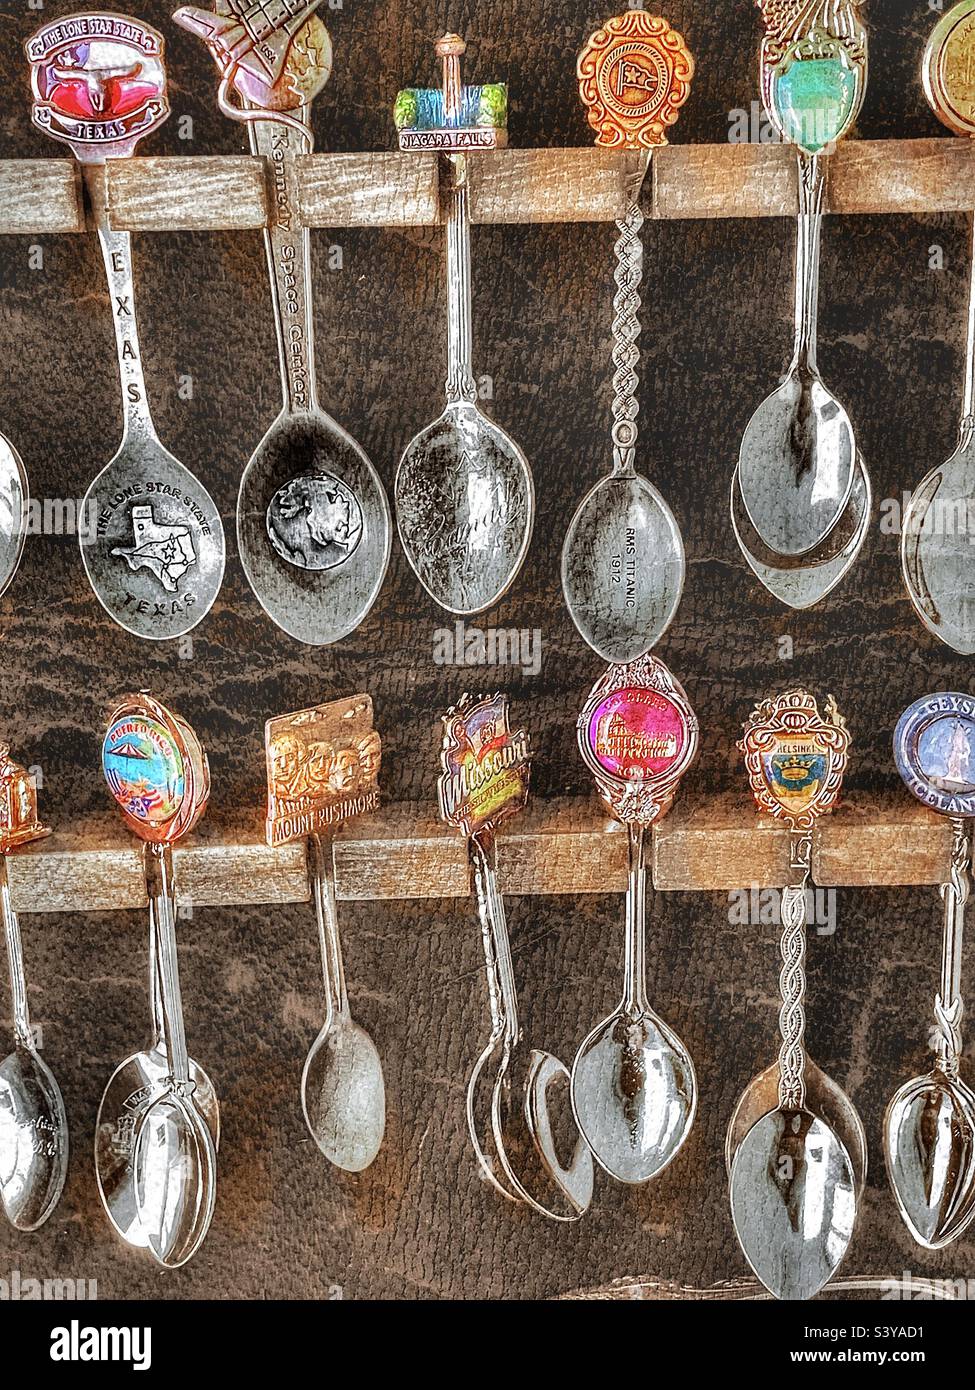 A spoon collection, in a display case filled beyond capacity, that is made  up of spoons from many cities, countries and landmarks. Grunge and HDR  effects digitally added via IOS app Snapseed